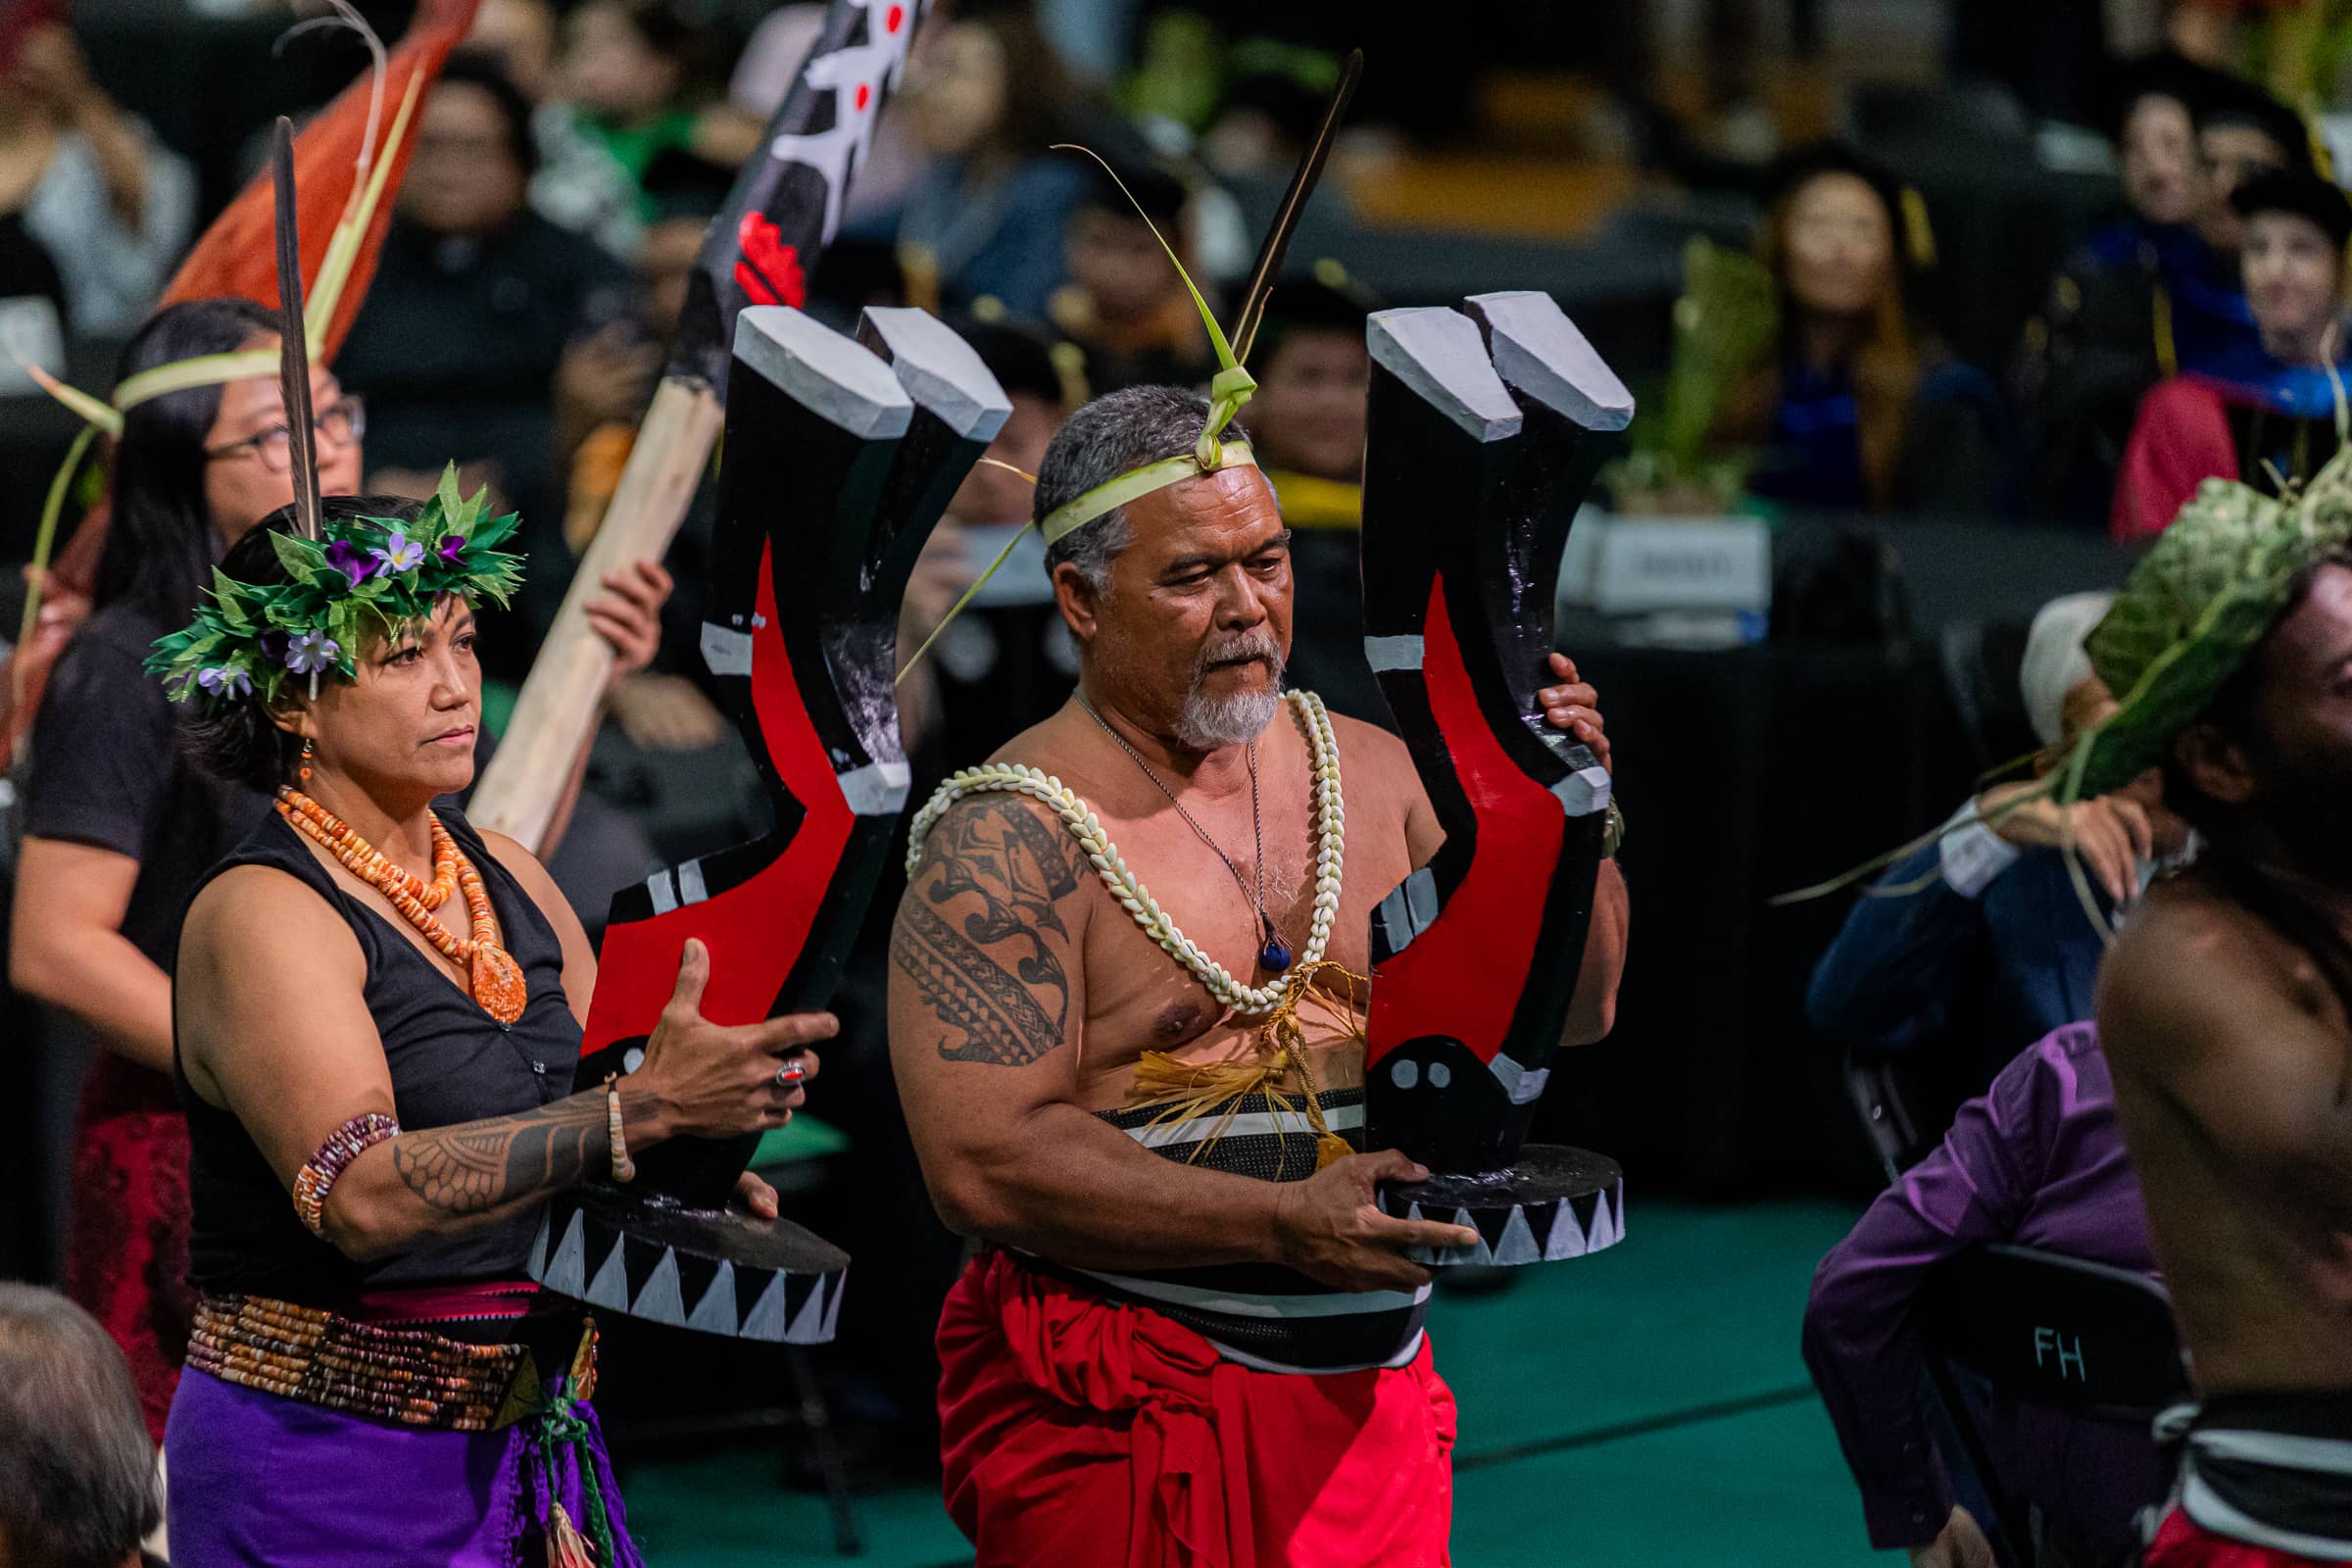 Traditional Micronesian culture is displayed during the investiture ceremony for Dr. Anita Borja Enriquez, 12th President of the University of Guam at her investiture on Tuesday, Nov. 14, at the Calvo Field House. 